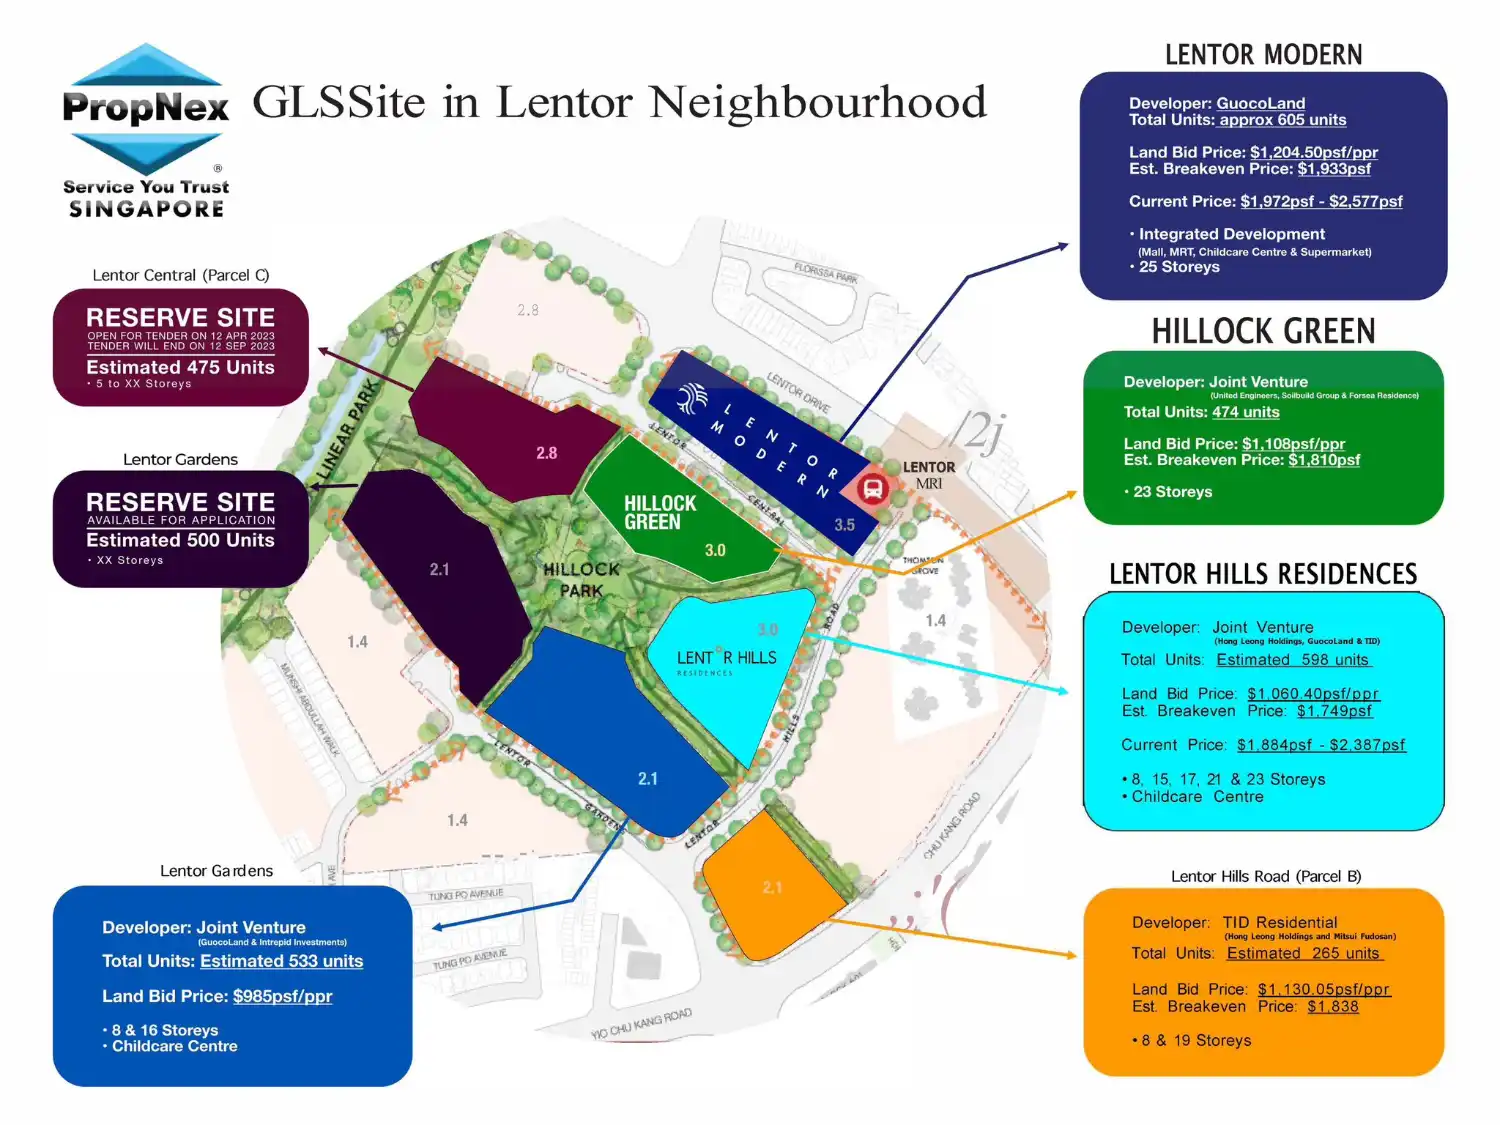 Lentor Area : How Many GLS Sites Are There